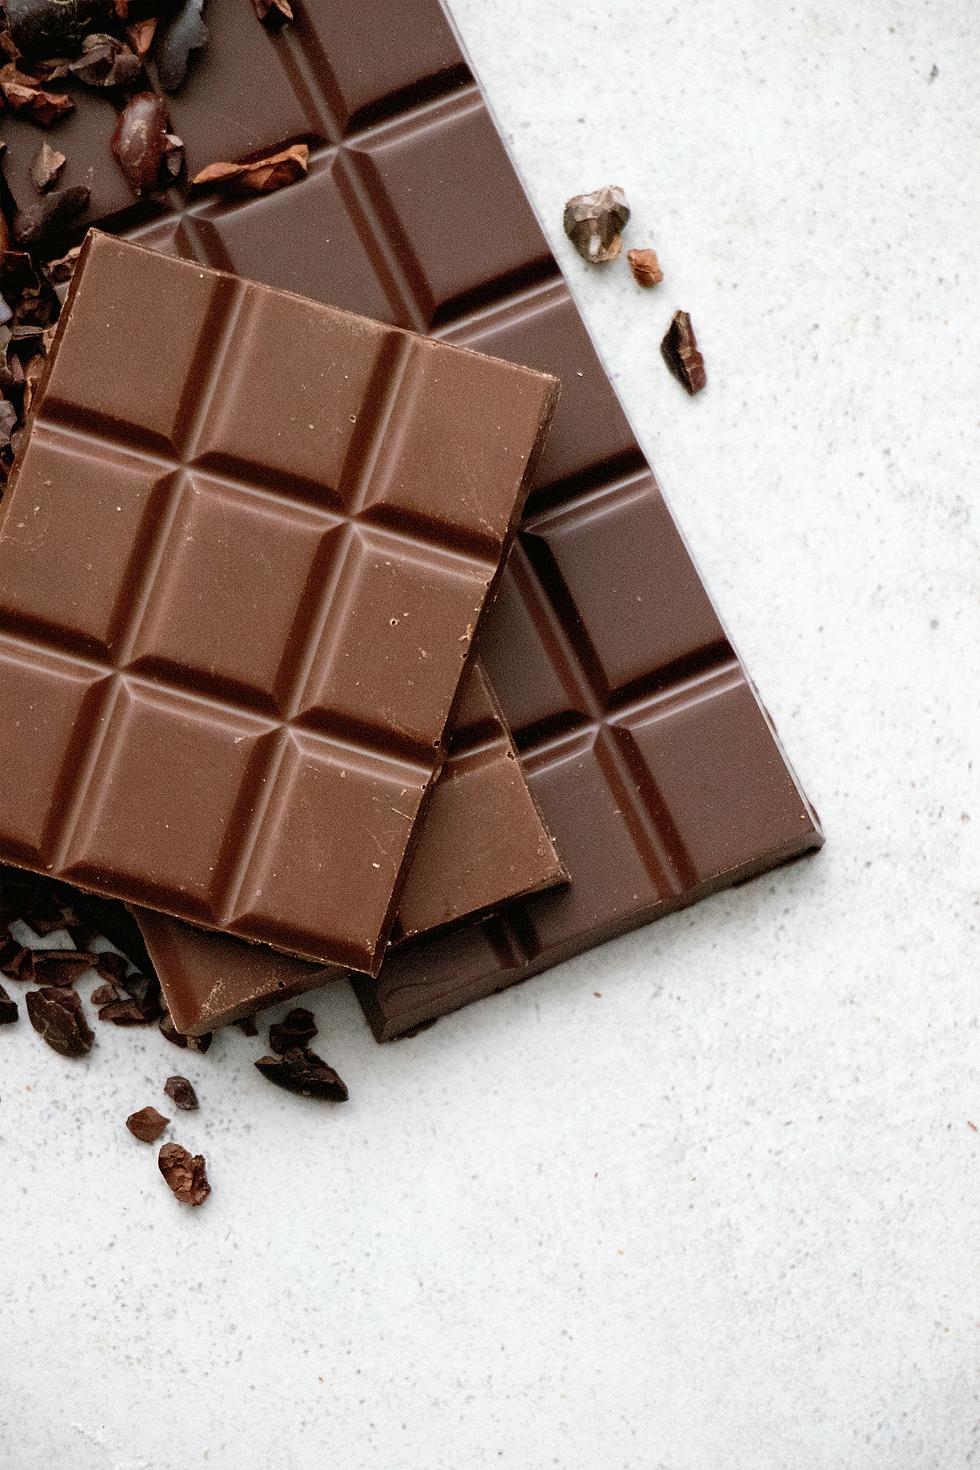 YUM! The New Jersey Chocolate Expo Is This Weekend&#x1f36b;